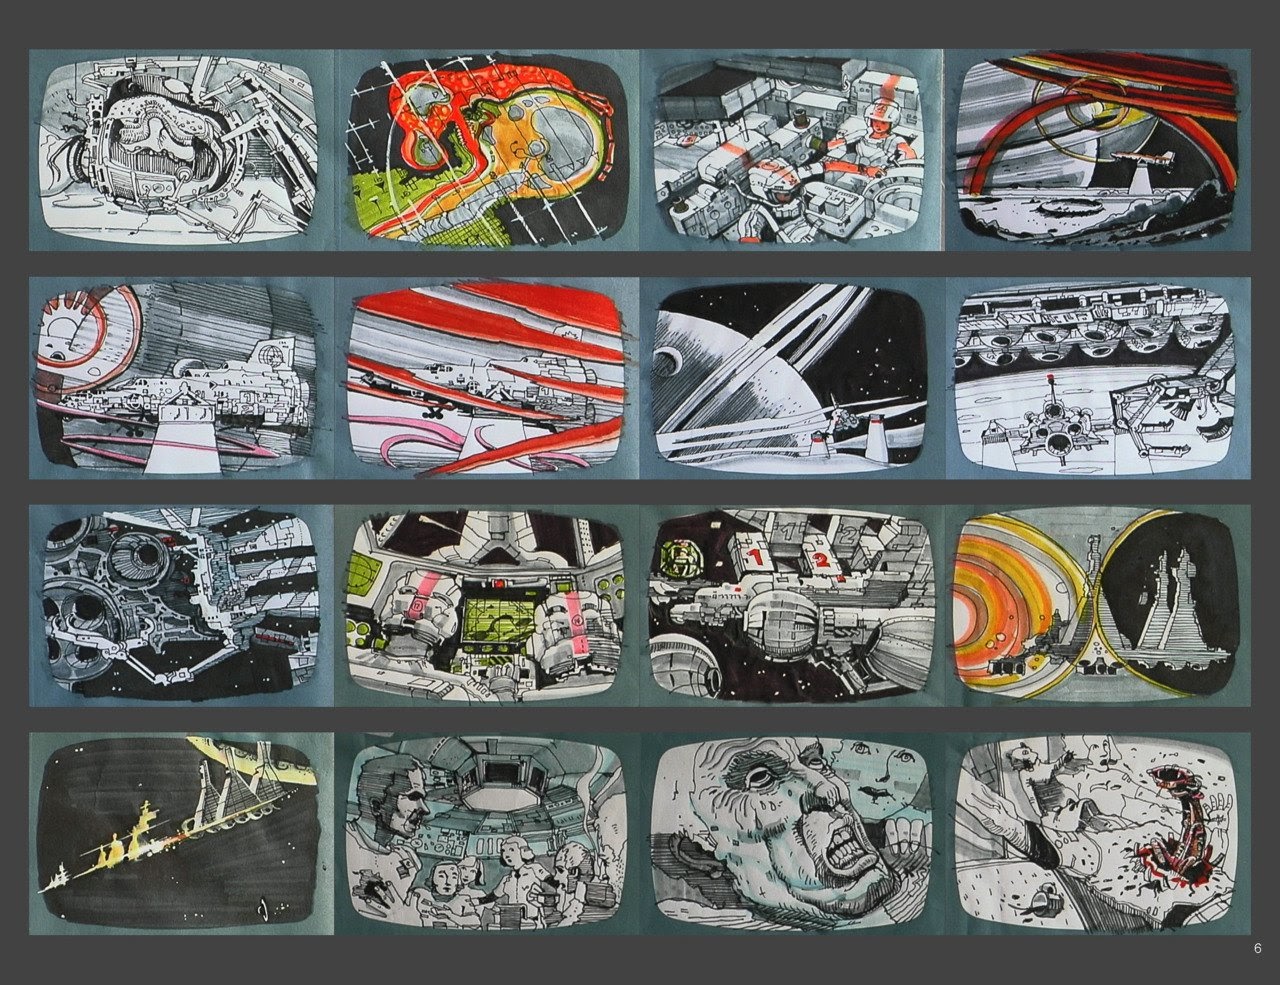 Ridley Scott's storyboards from the movie Alien.